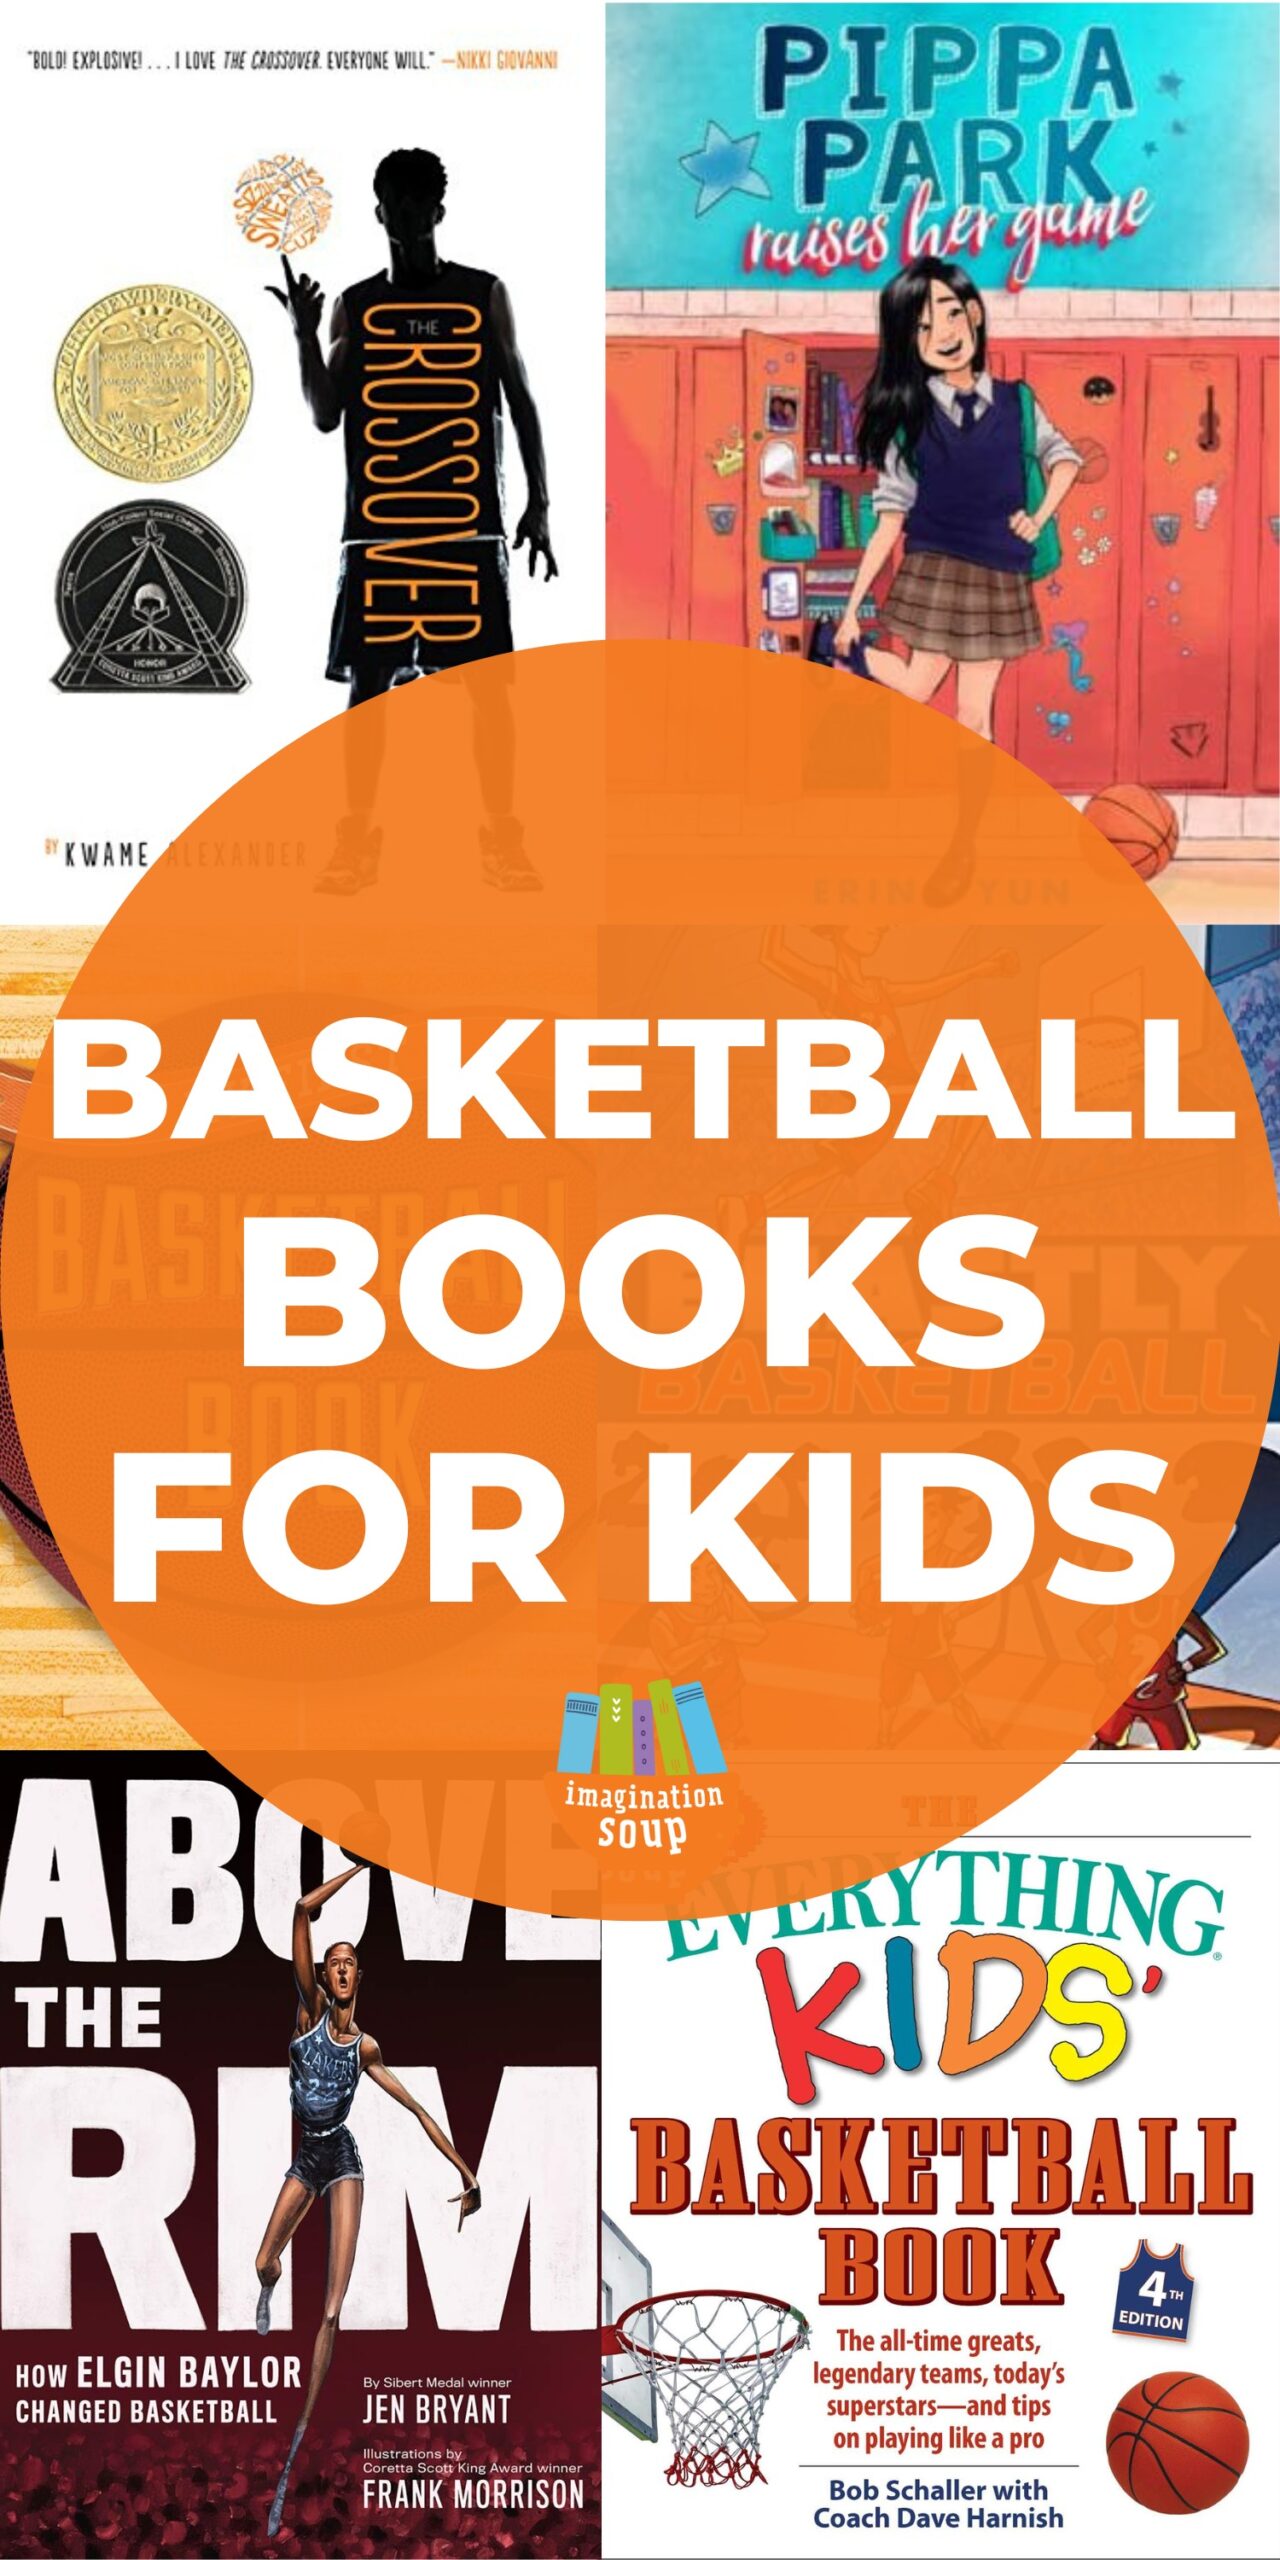 If you have a child who wants to learn more about basketball, or already loves the sport, these children's basketball books will get your children reading books about a topic of interest.